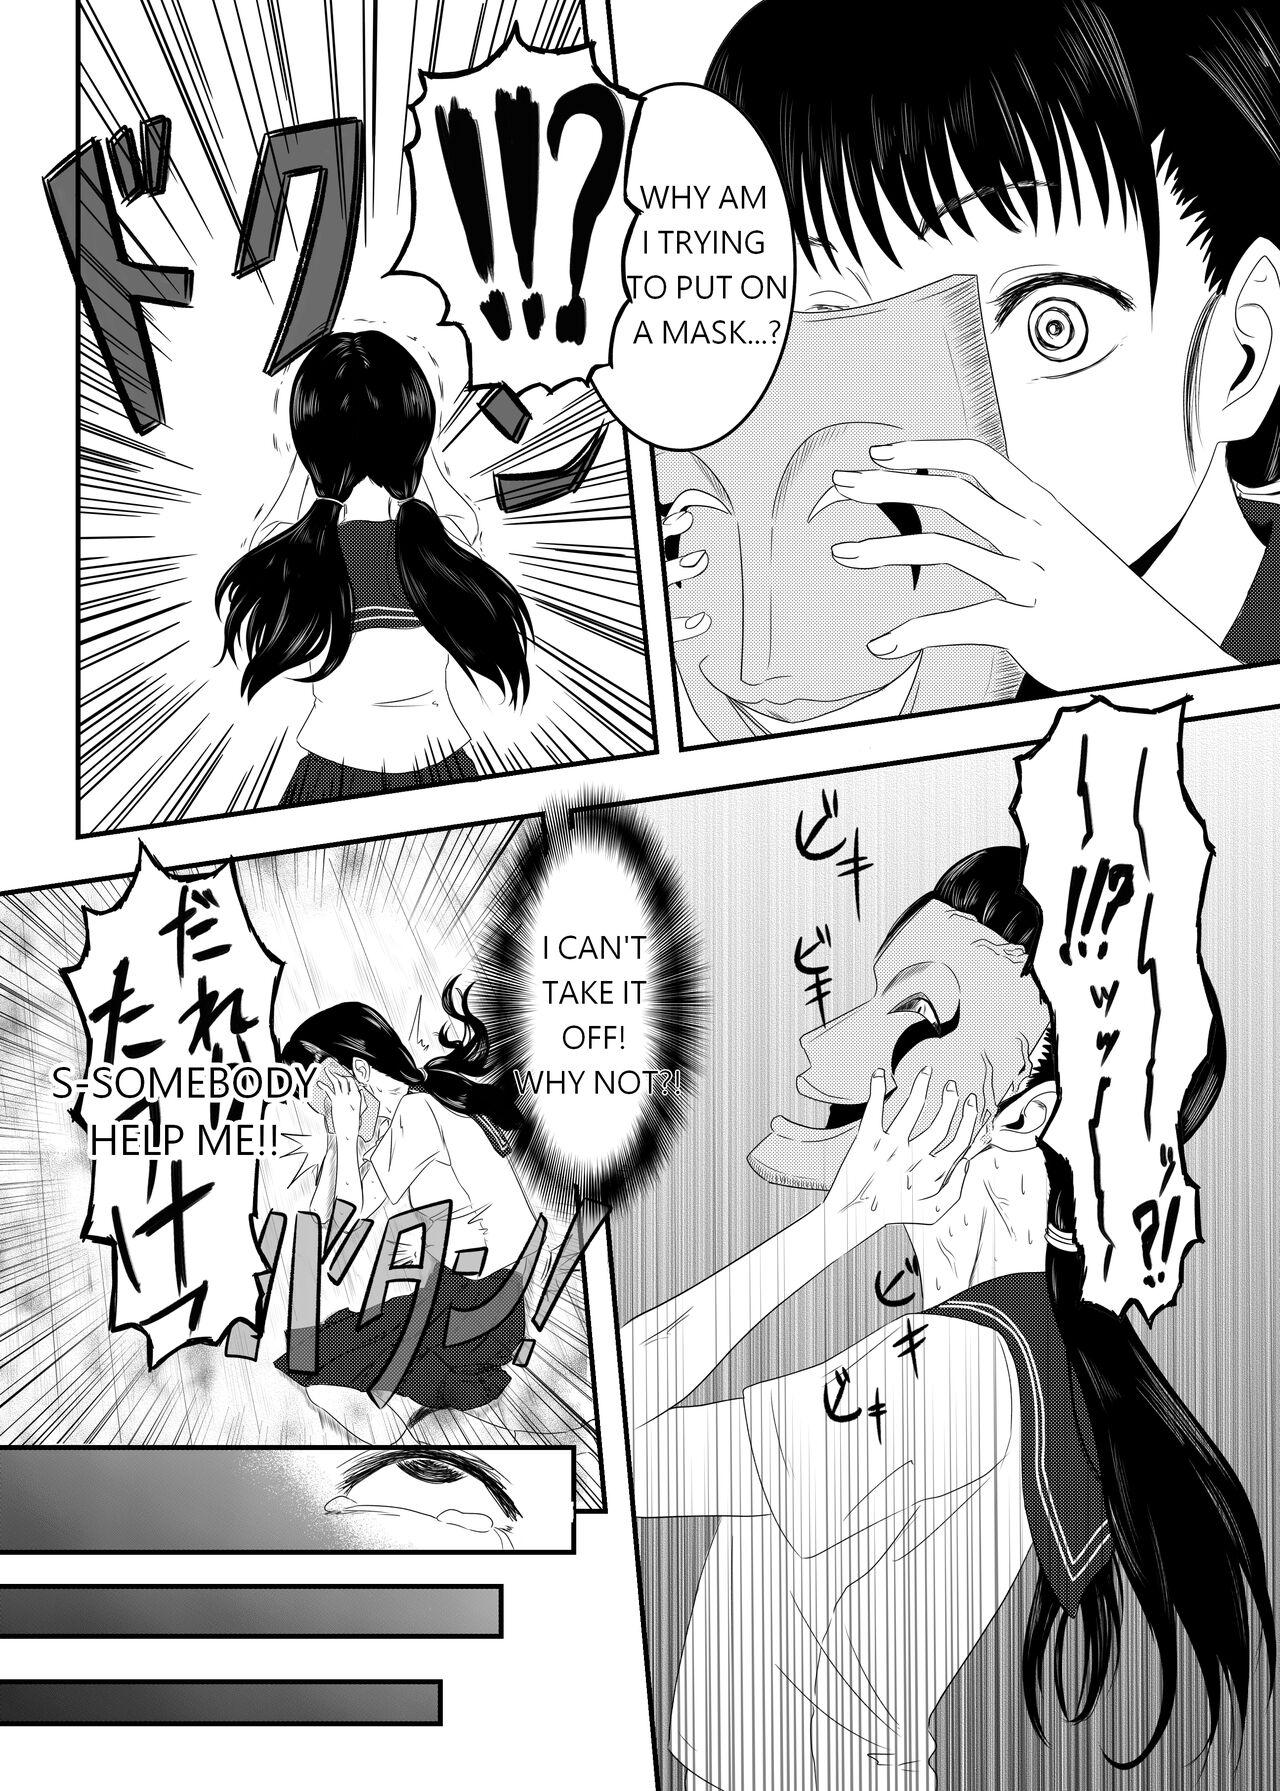 1080p The Evil Mask 1 - The mask 4some - Page 8